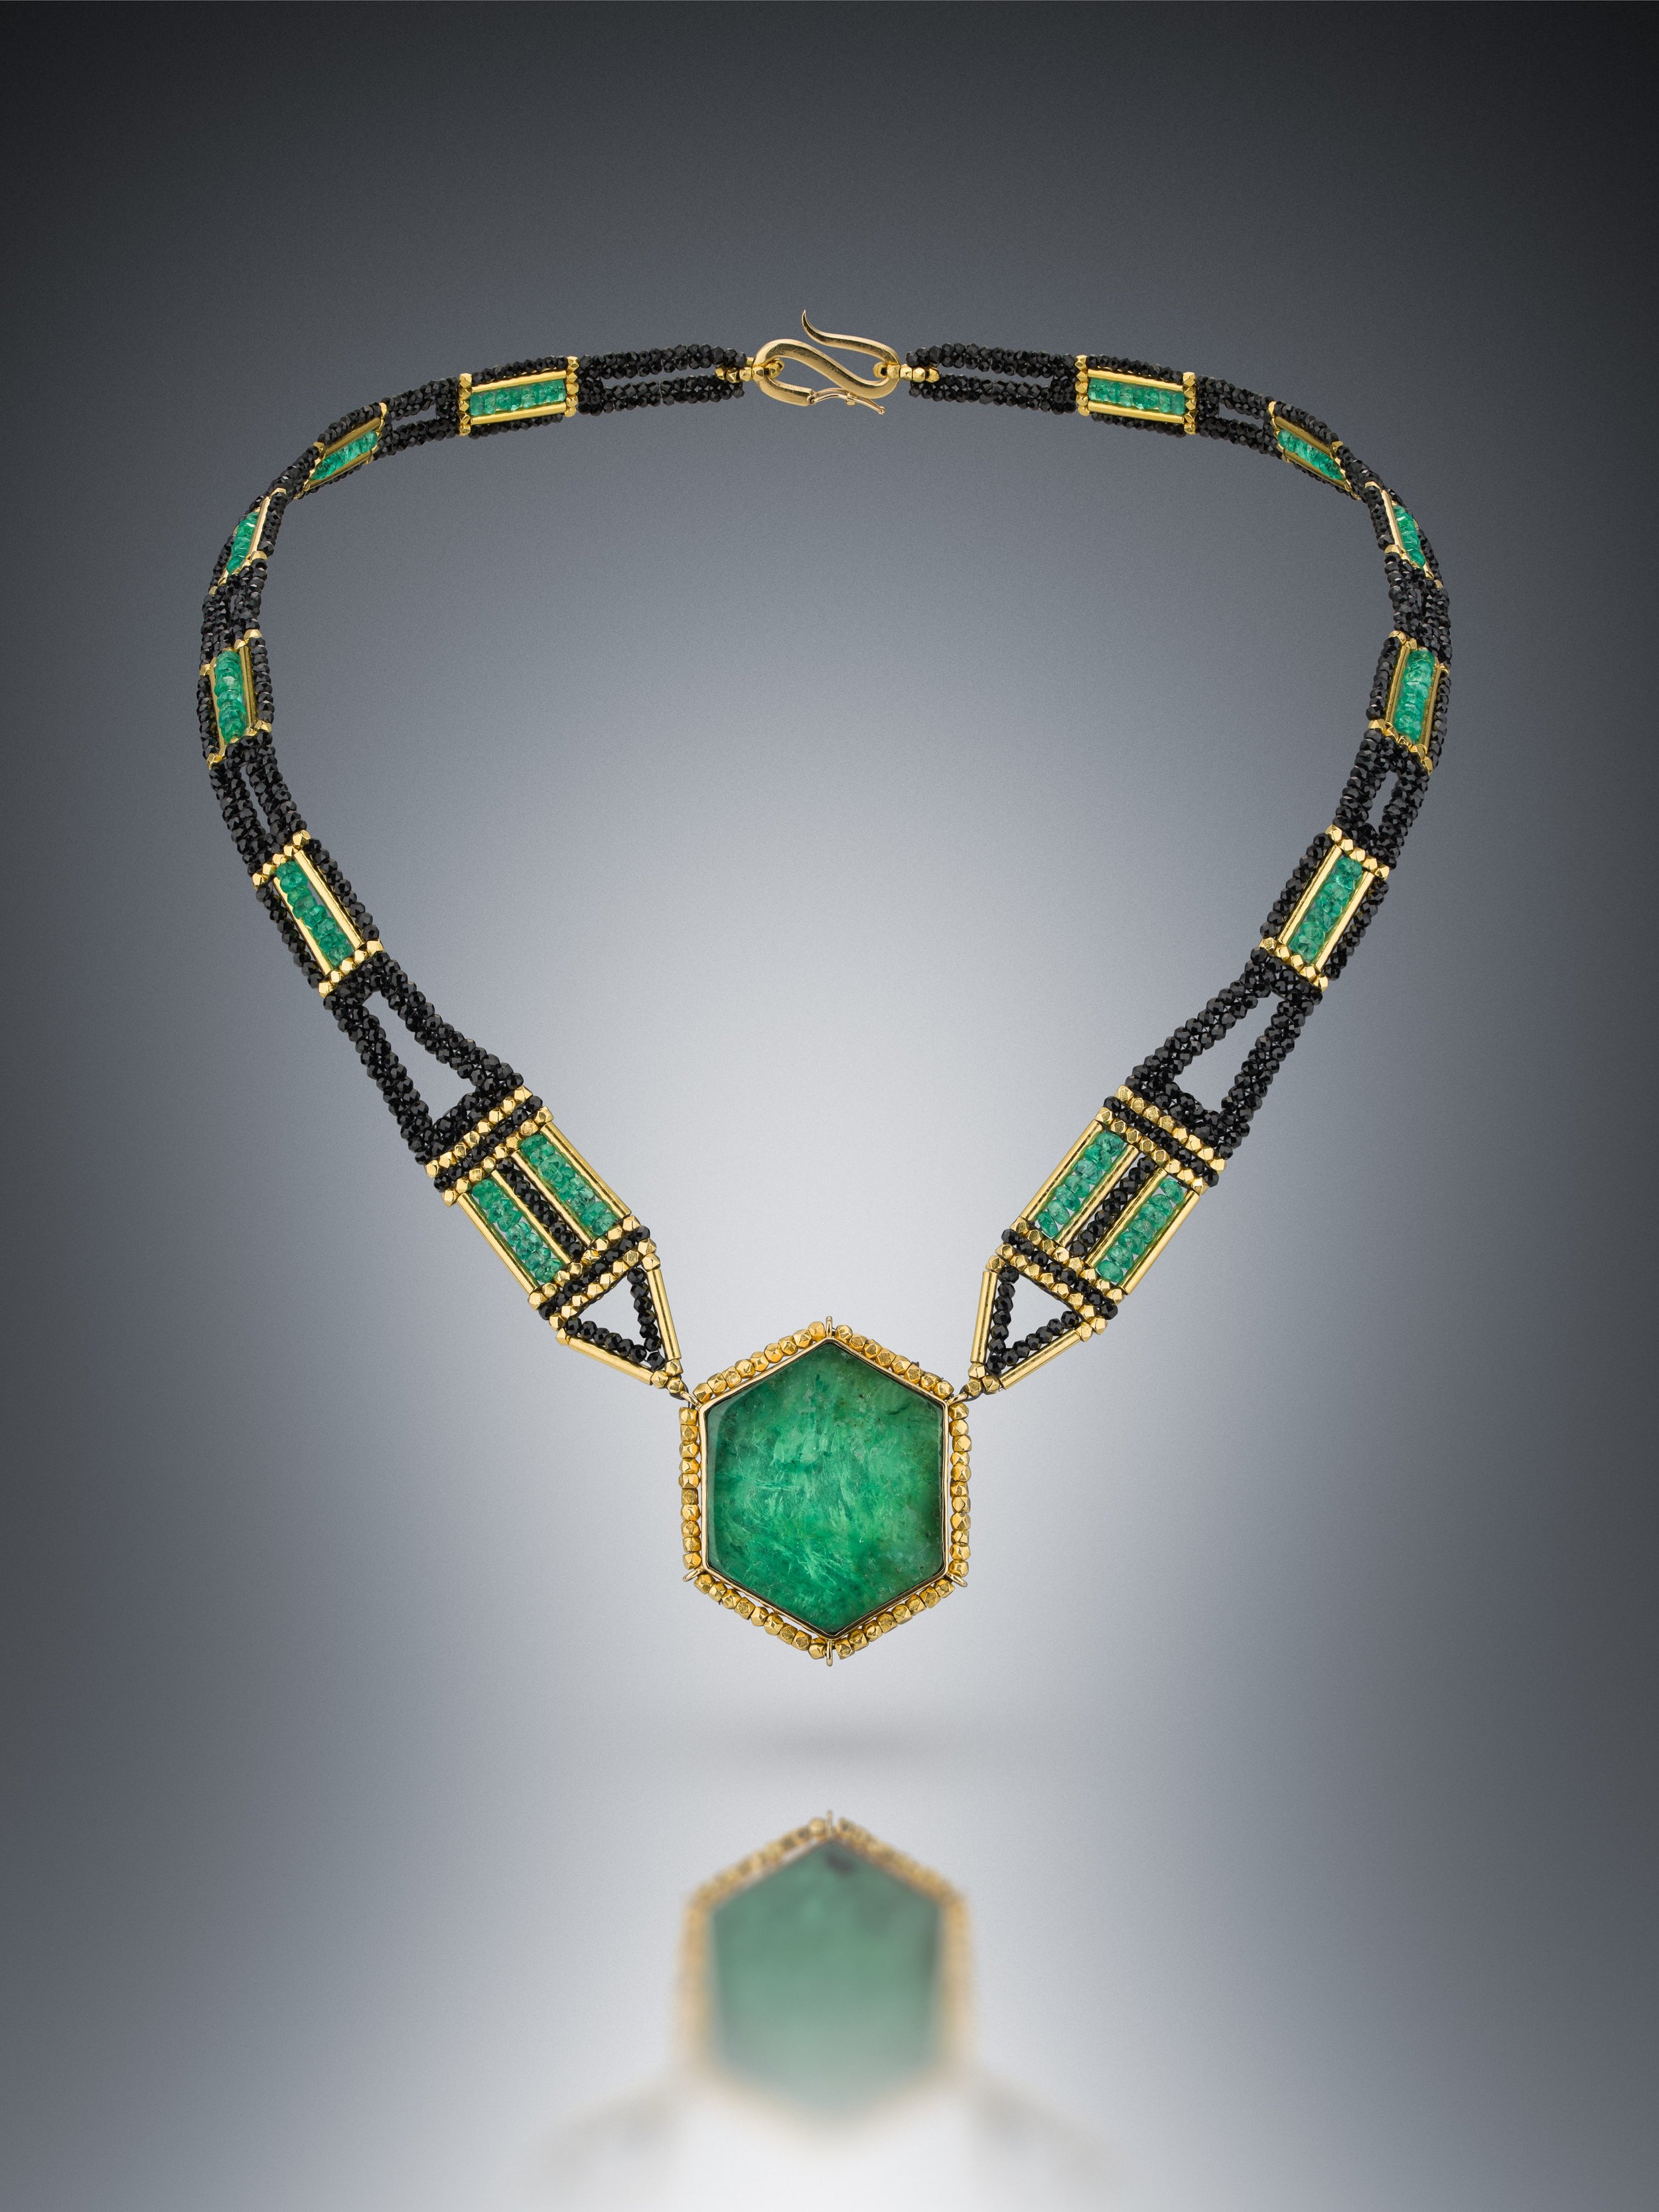 Emerald Slice.  This collar is hand woven of emerald, black spinel, and 18k gold beads. The bezel is fabricated with 18k gold and fine silver, set with an emerald slice.